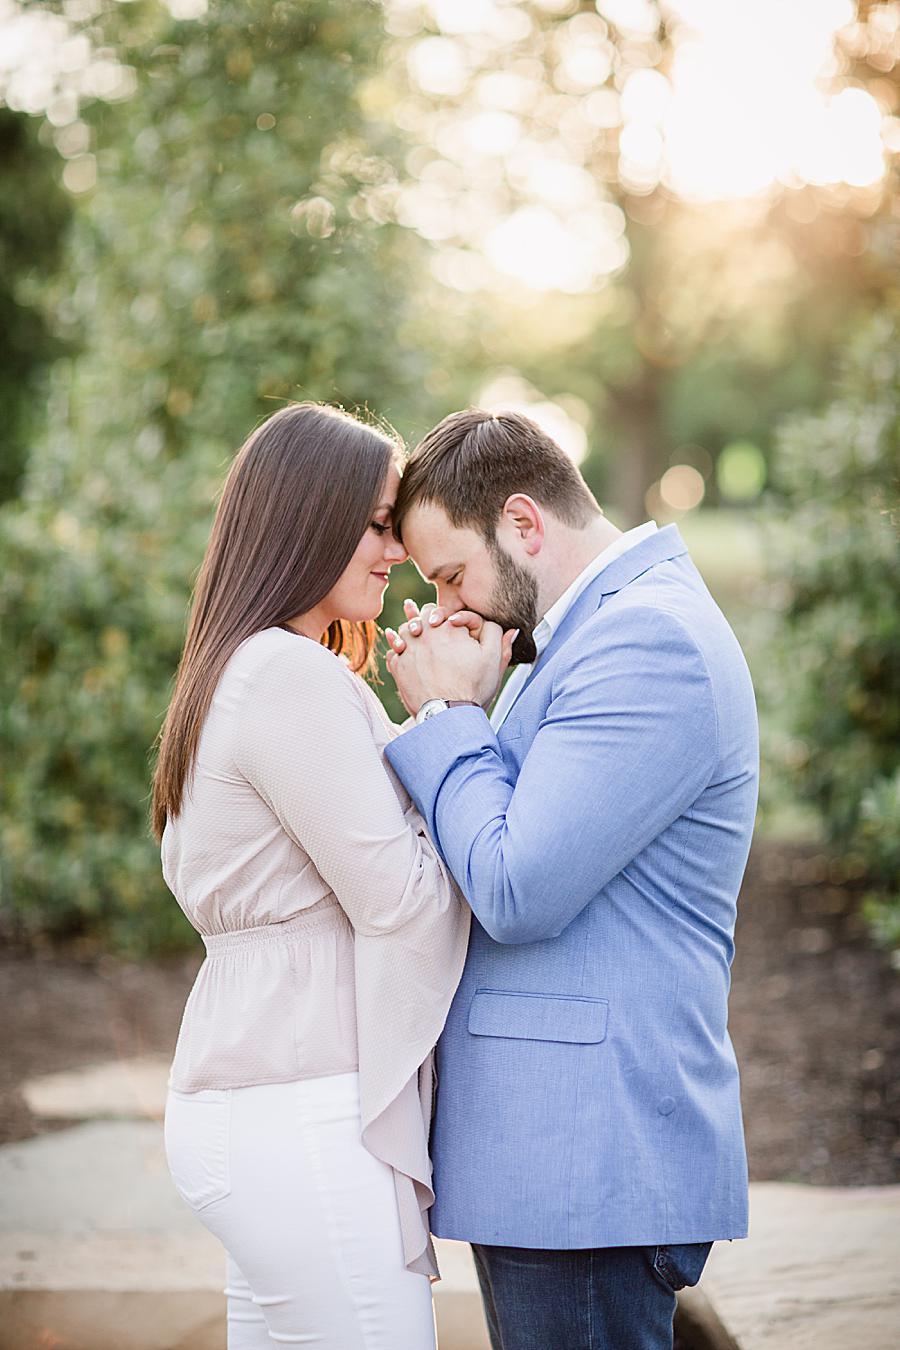 Fingers laced at this 2018 favorite engagements by Knoxville Wedding Photographer, Amanda May Photos.